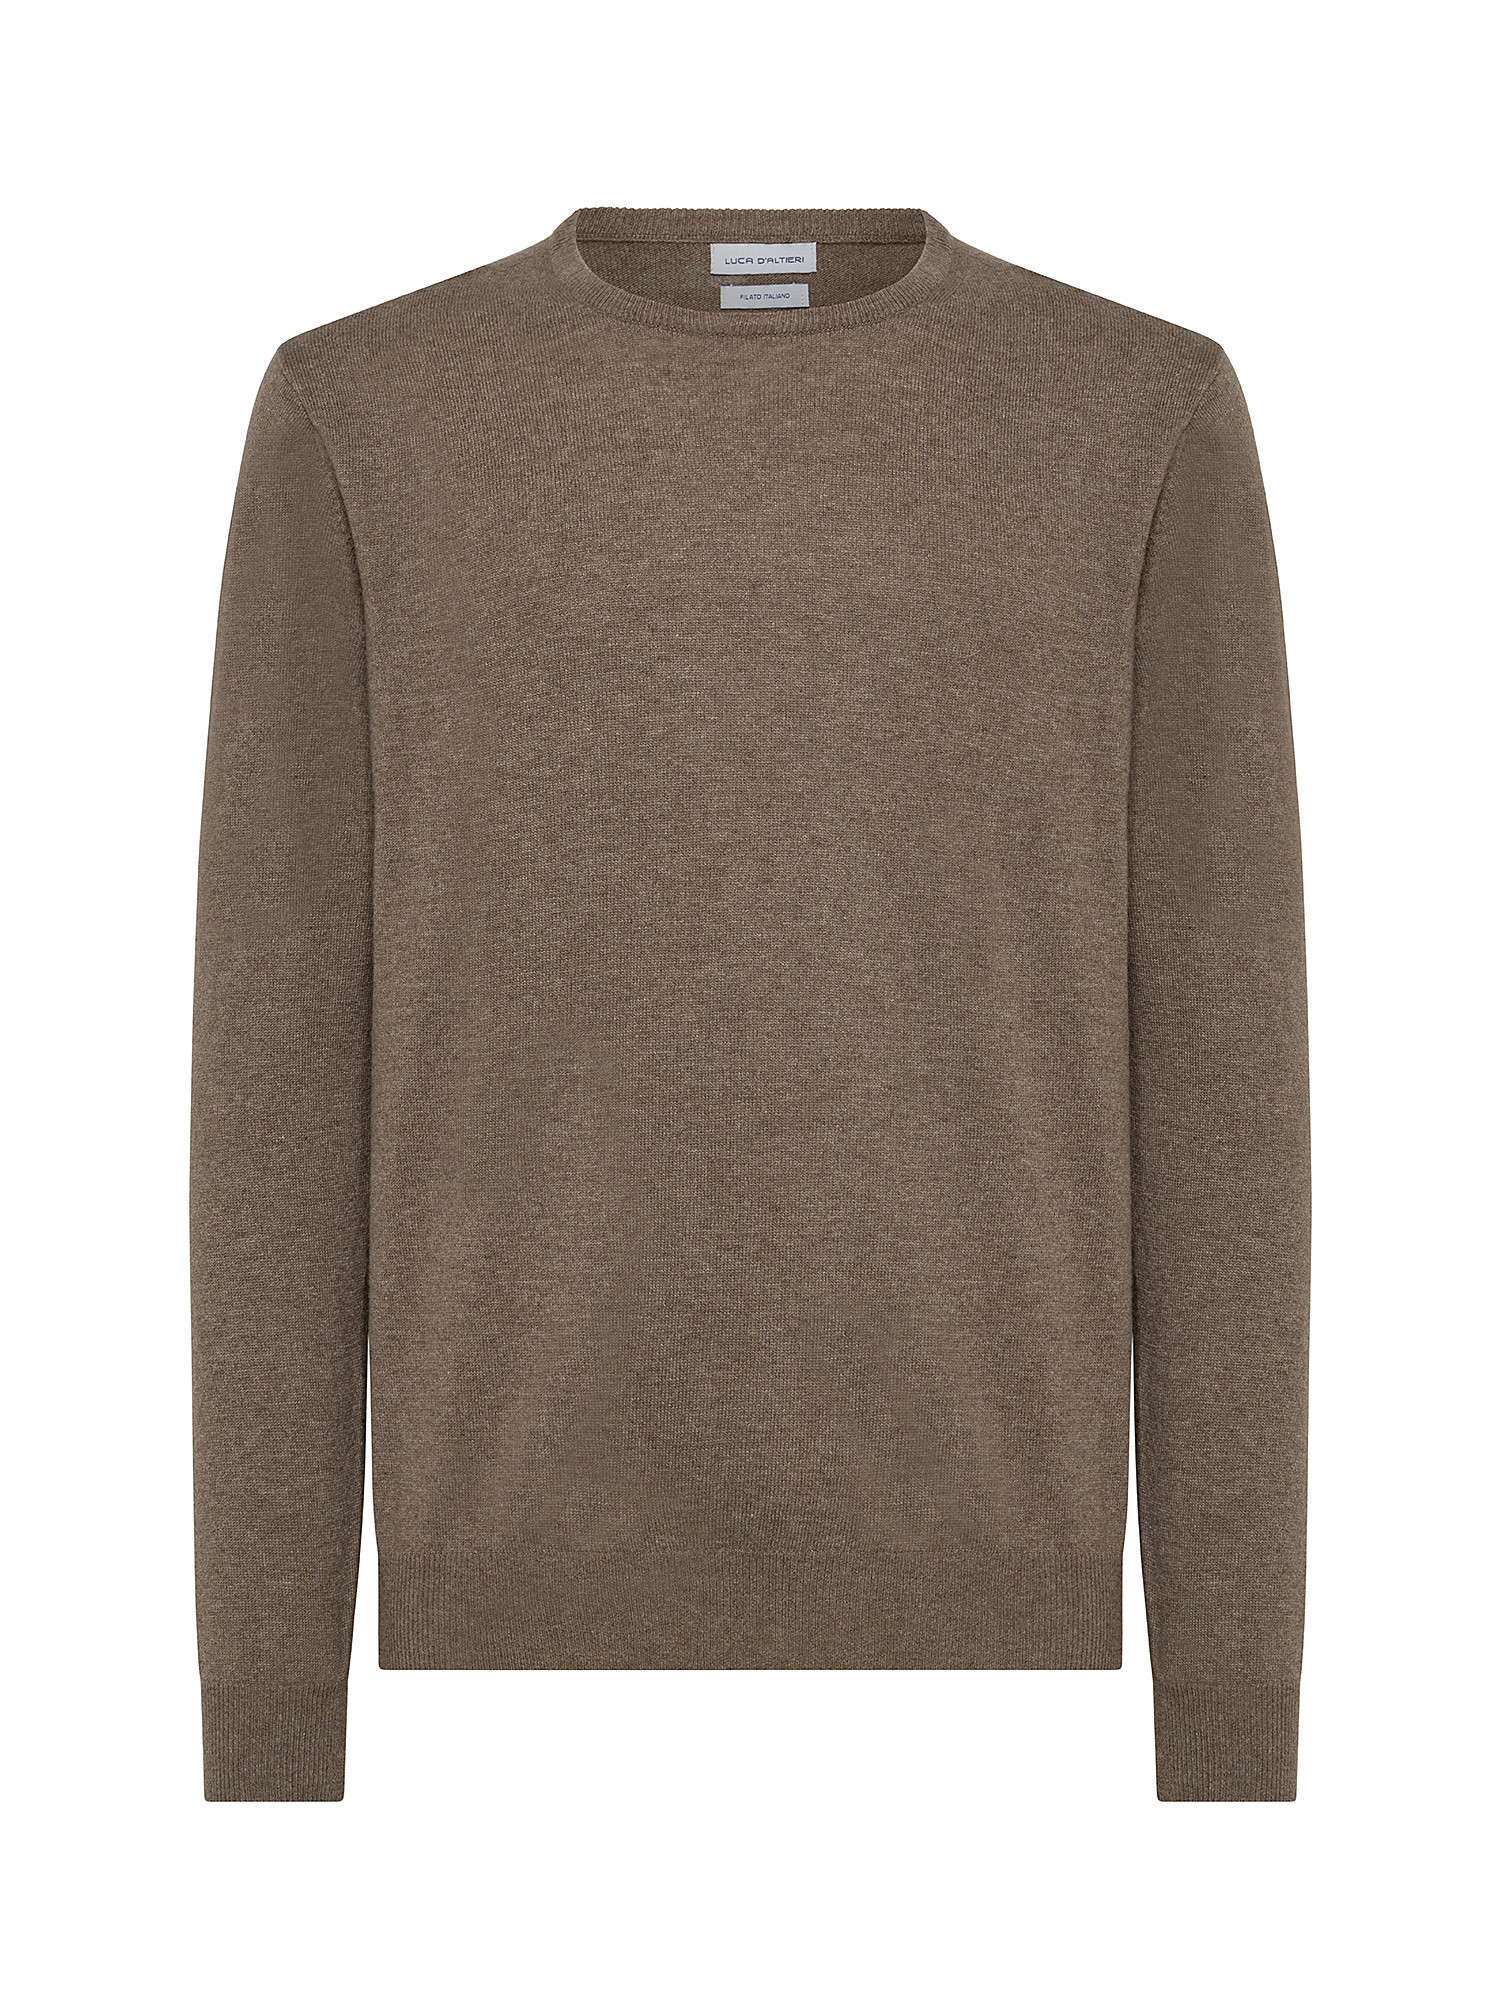 Cashmere Blend crewneck sweater with noble fibers, Natural, large image number 0